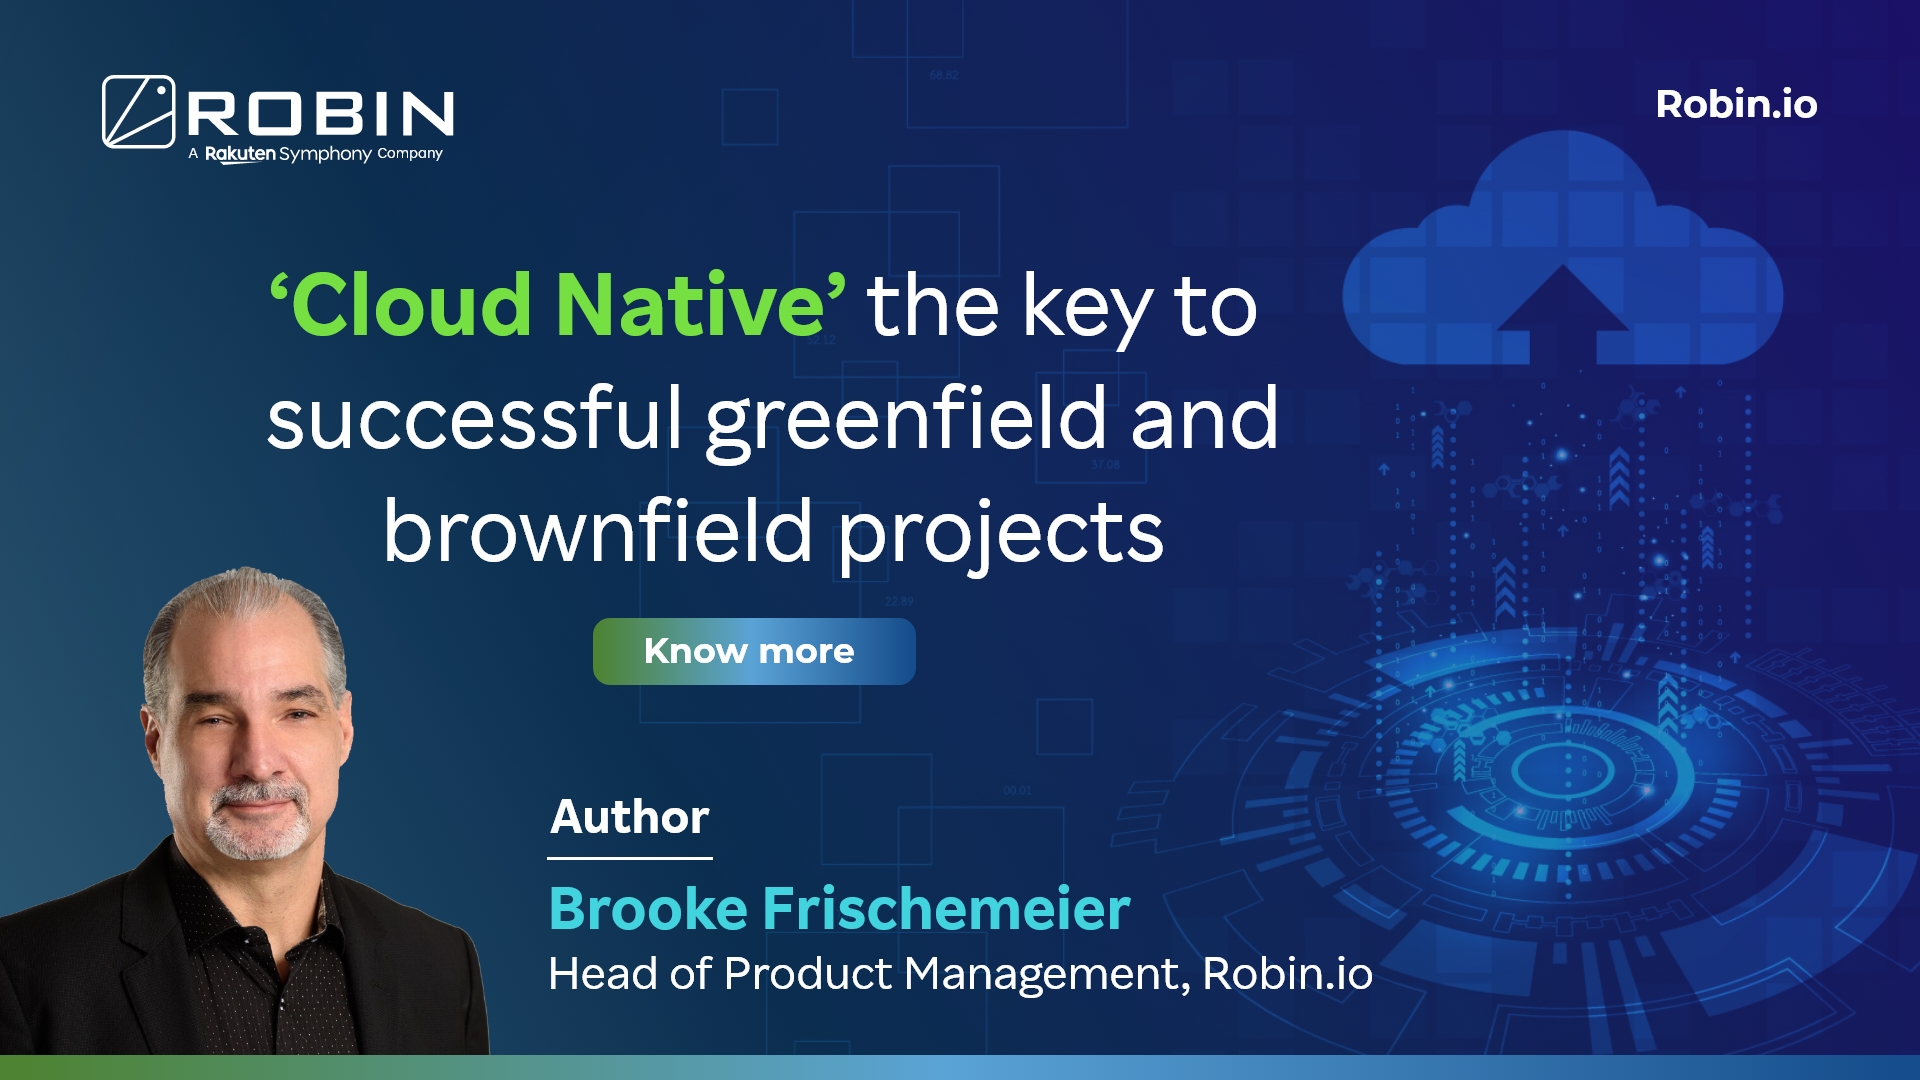 ‘Cloud Native’ the key to successful greenfield and brownfield projects